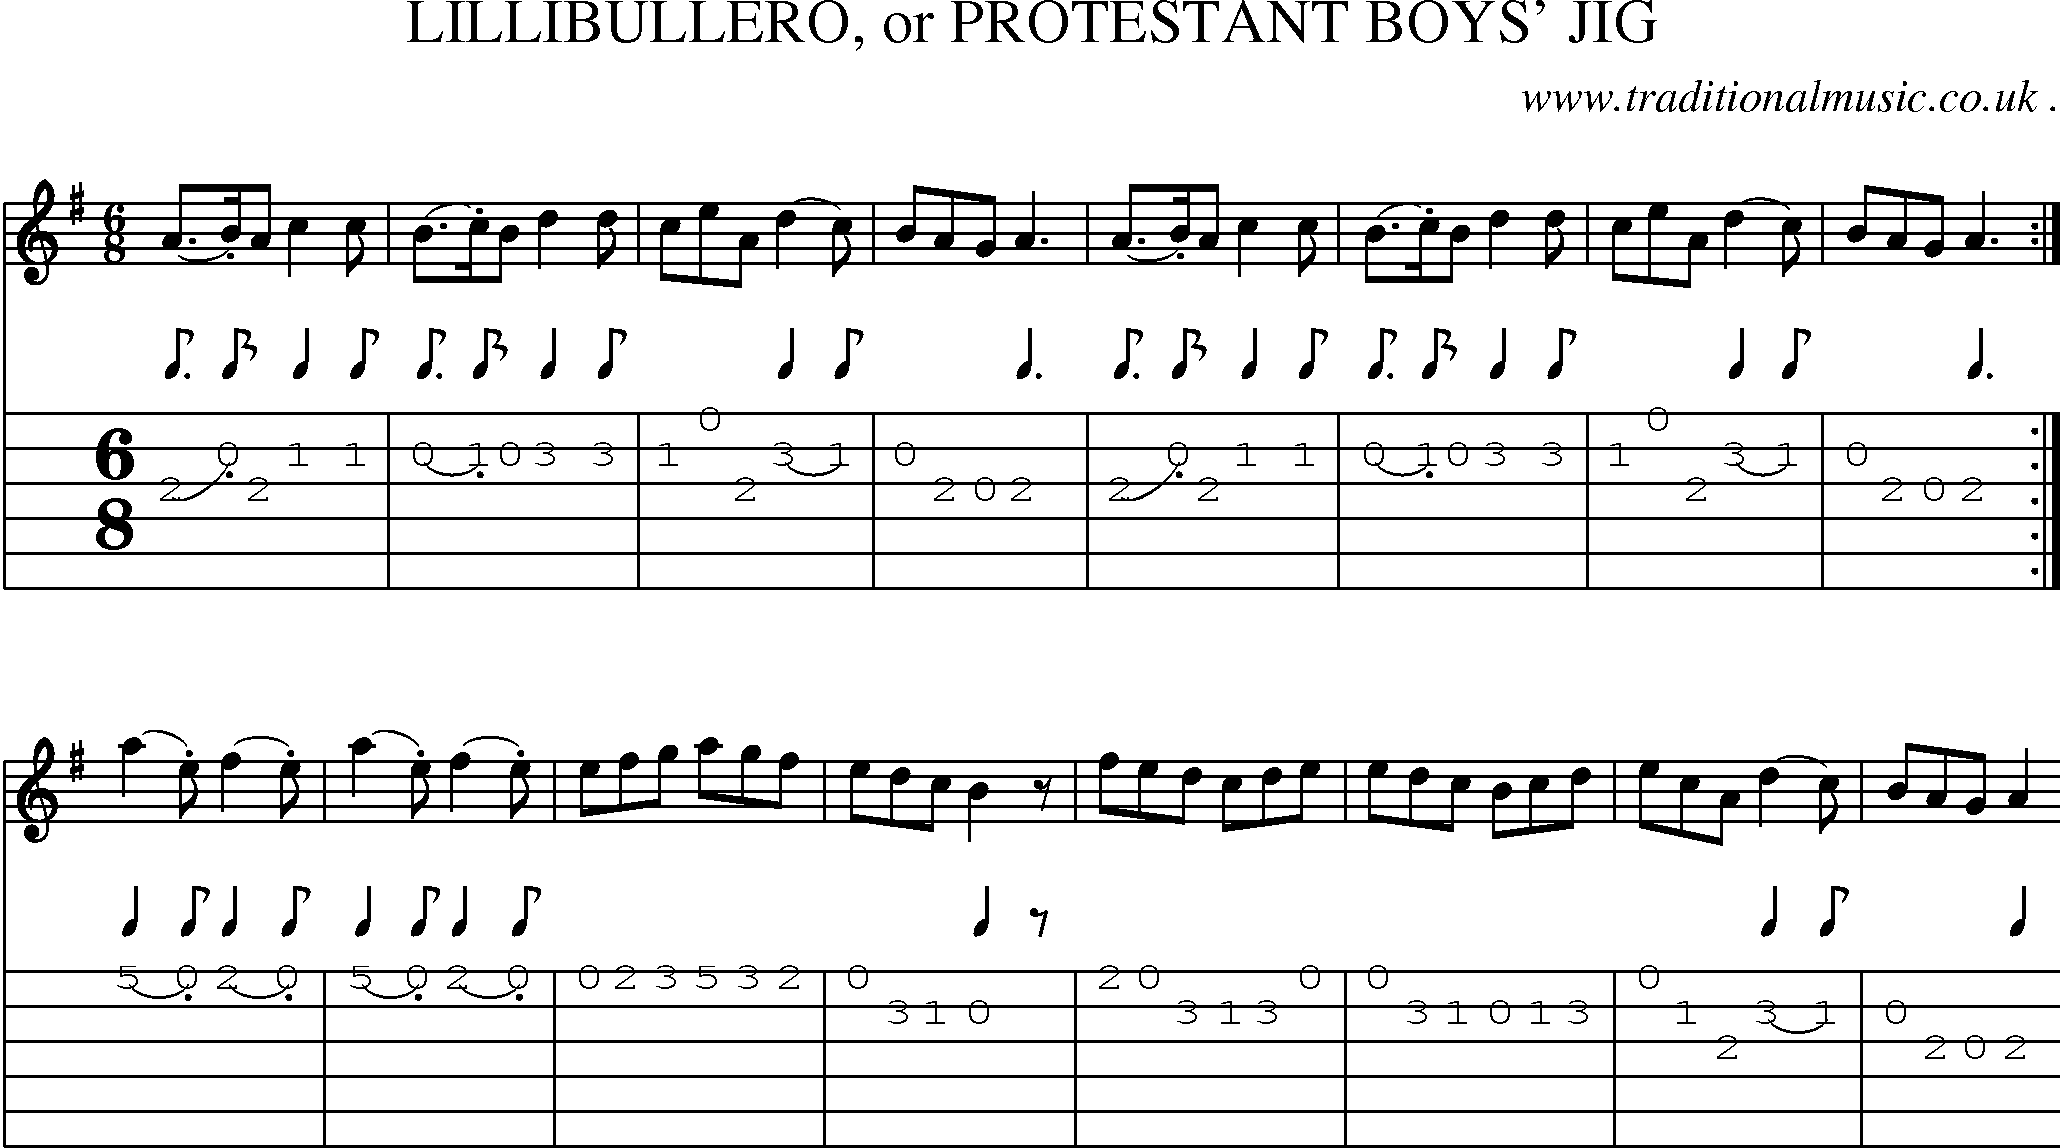 Sheet-Music and Guitar Tabs for Lillibullero Or Protestant Boys Jig